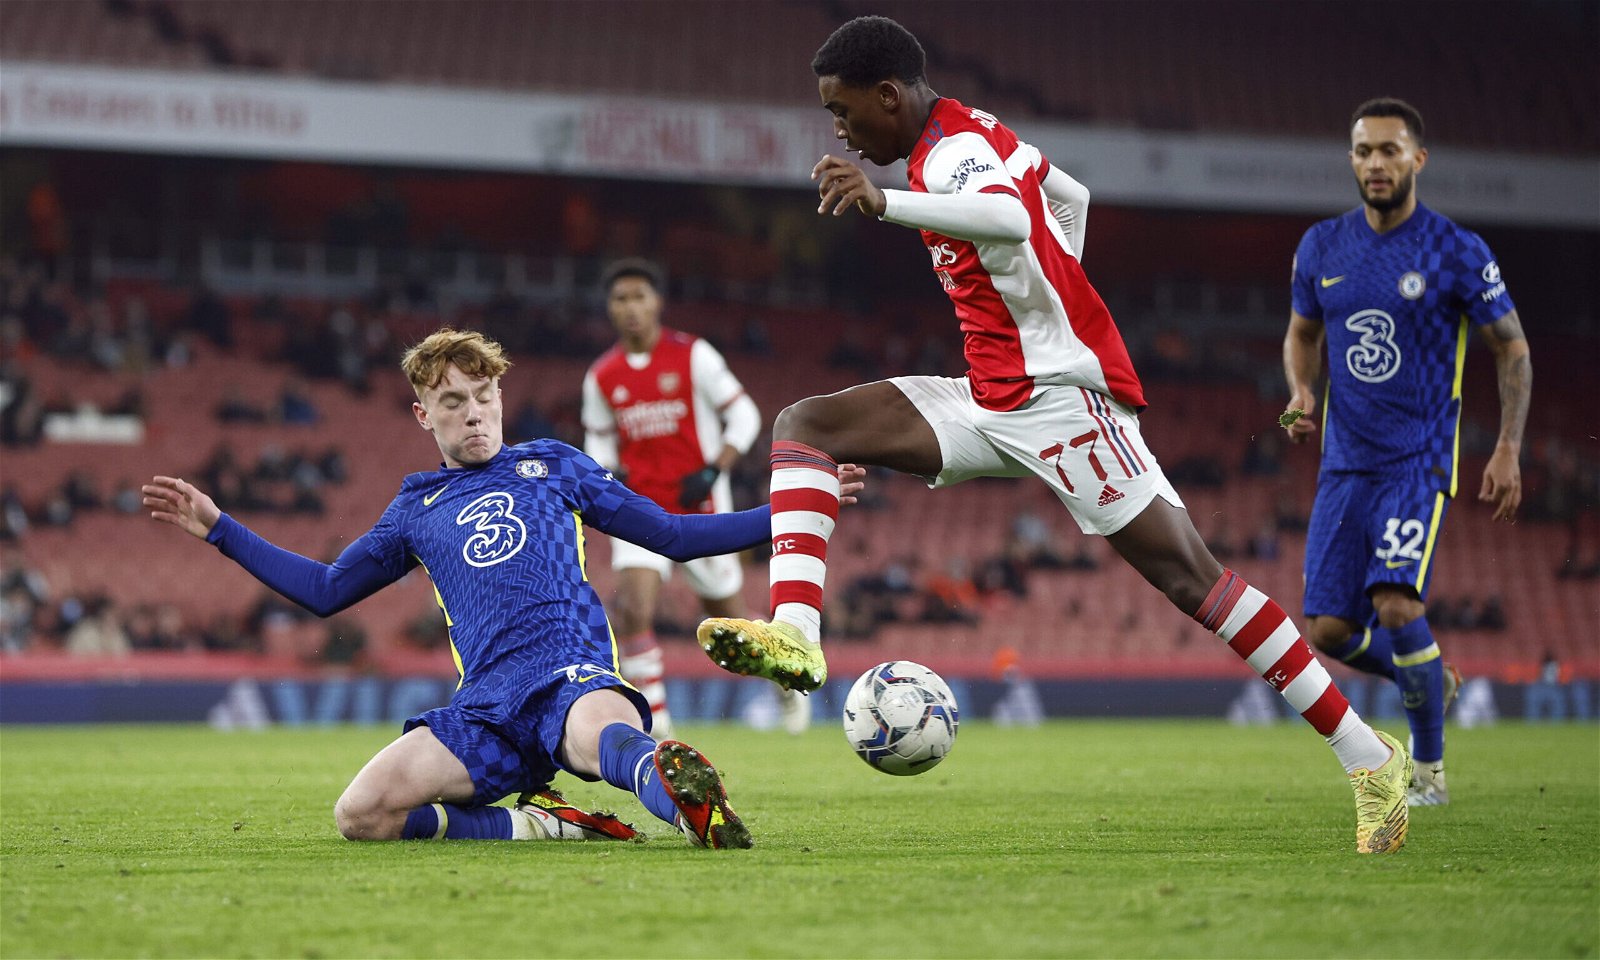 Khayon-Edwards-in-EFL-Trophy-action-for-Arsenal-U21s-at-the-Emirates-against-Chelsea